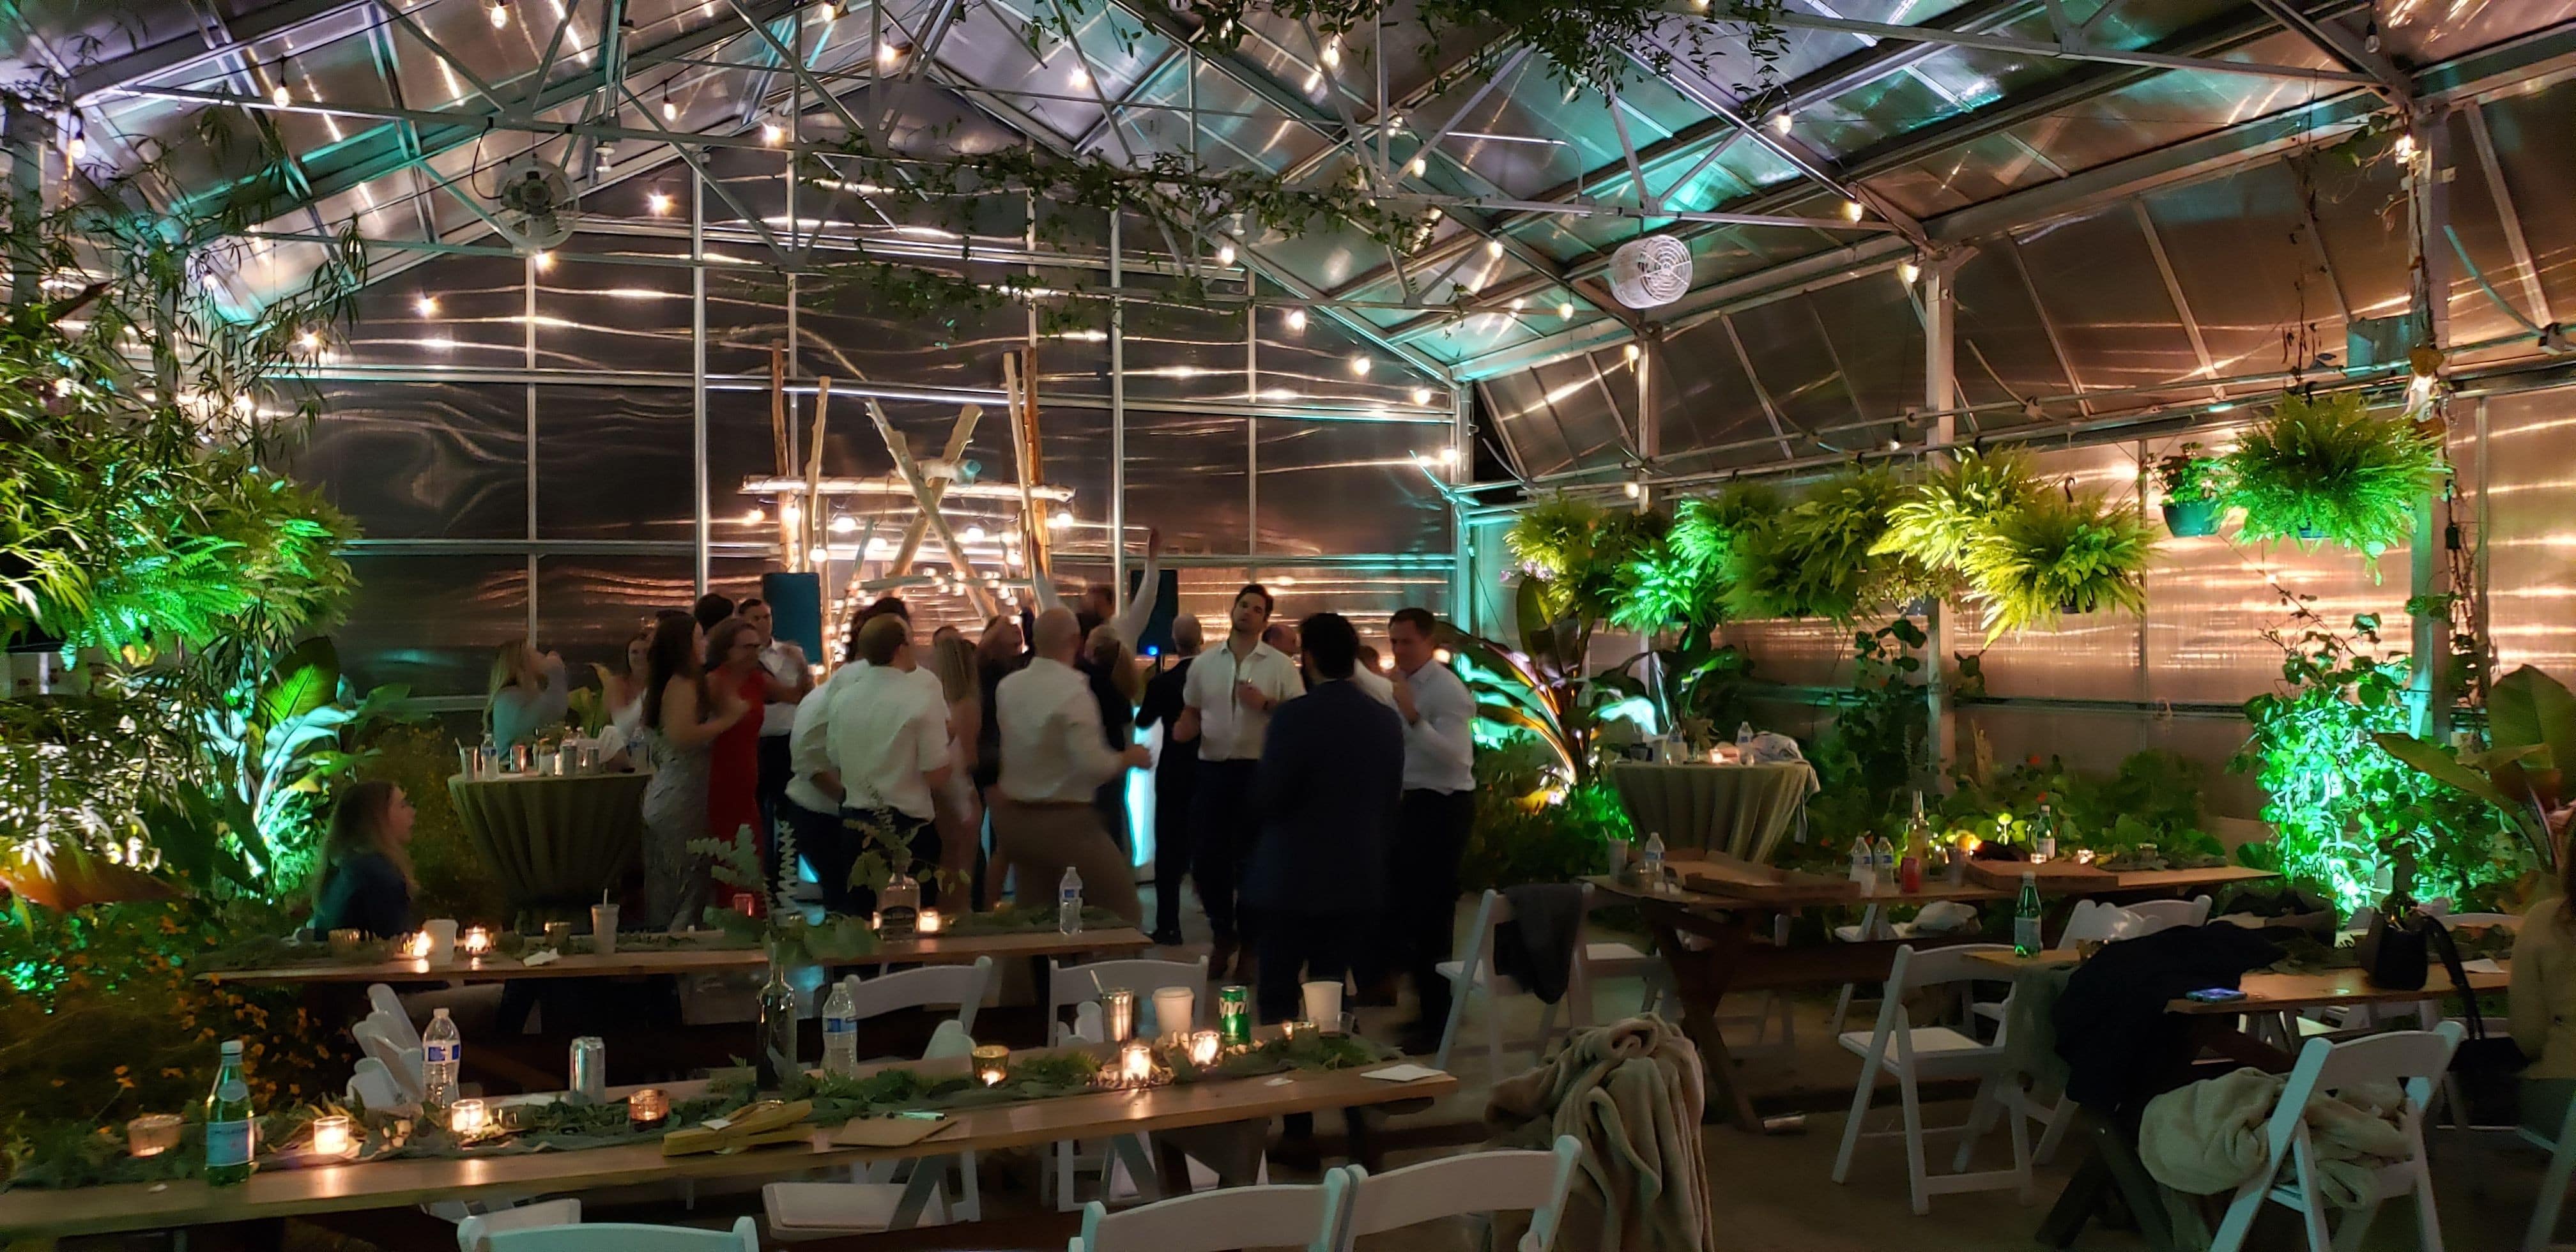 Mint Green up lighting for a wedding inside the greenhouse of Sitio Events.